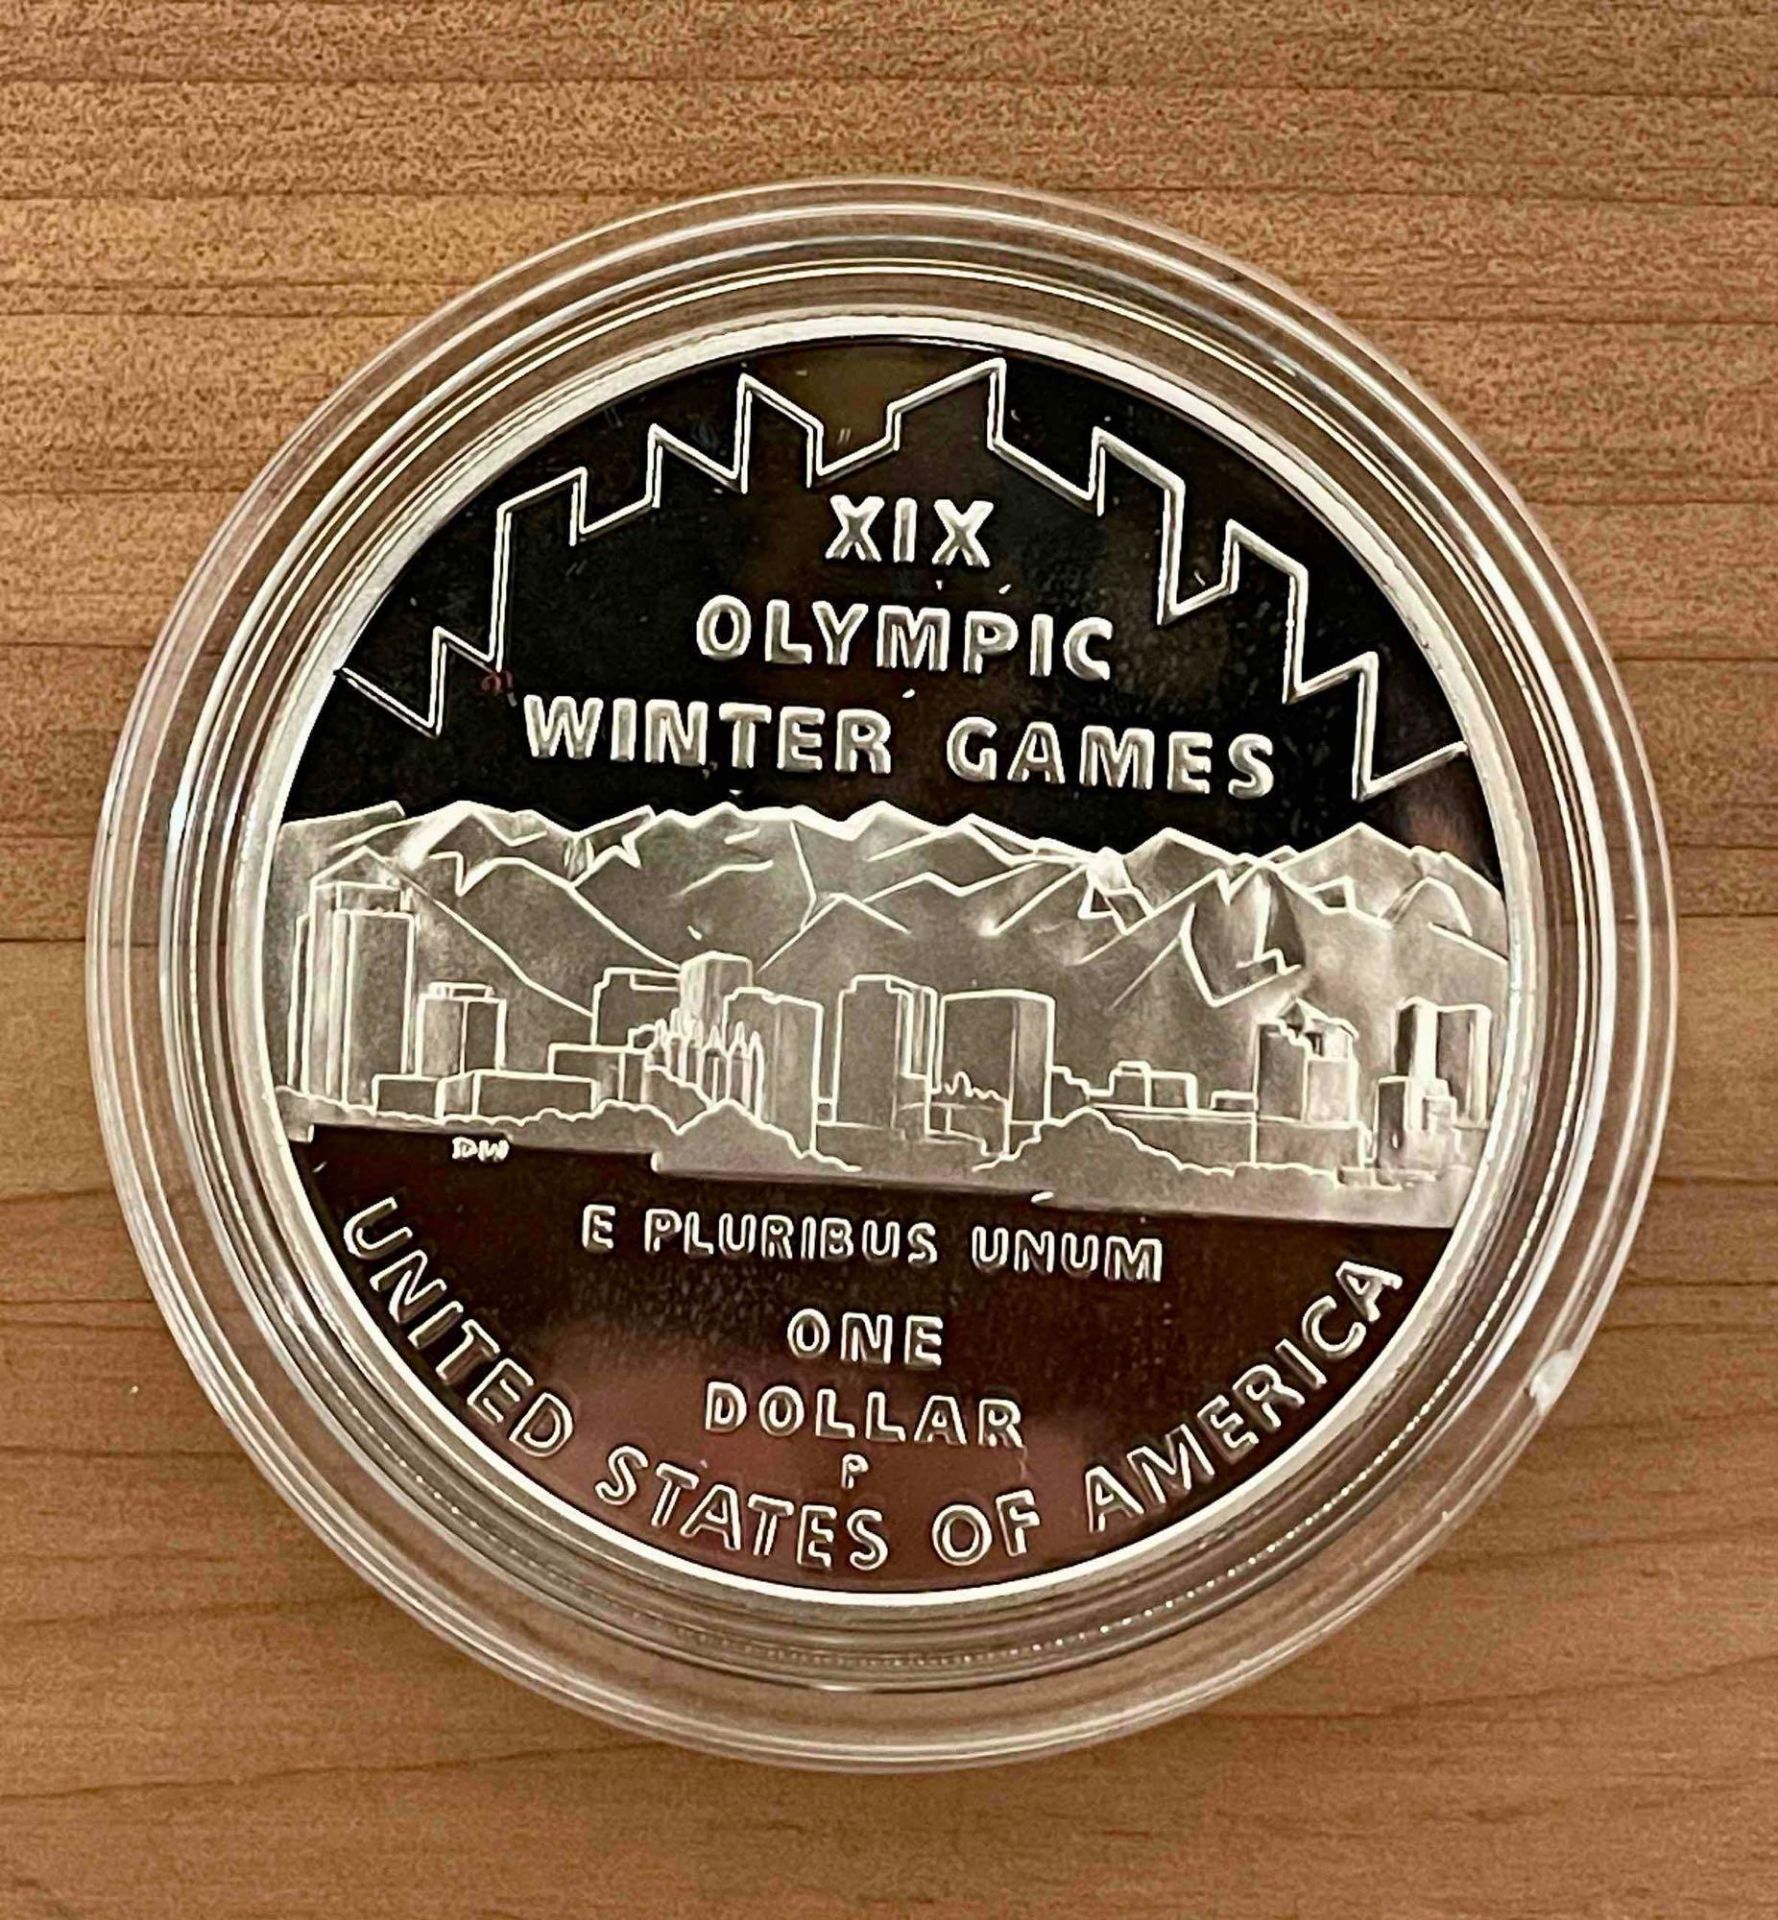 2002 W & P Salt Lake Olympic Winter Games Commemorative Two-Coin Set $5 Gold & $1 Silver Proofs - Image 6 of 11